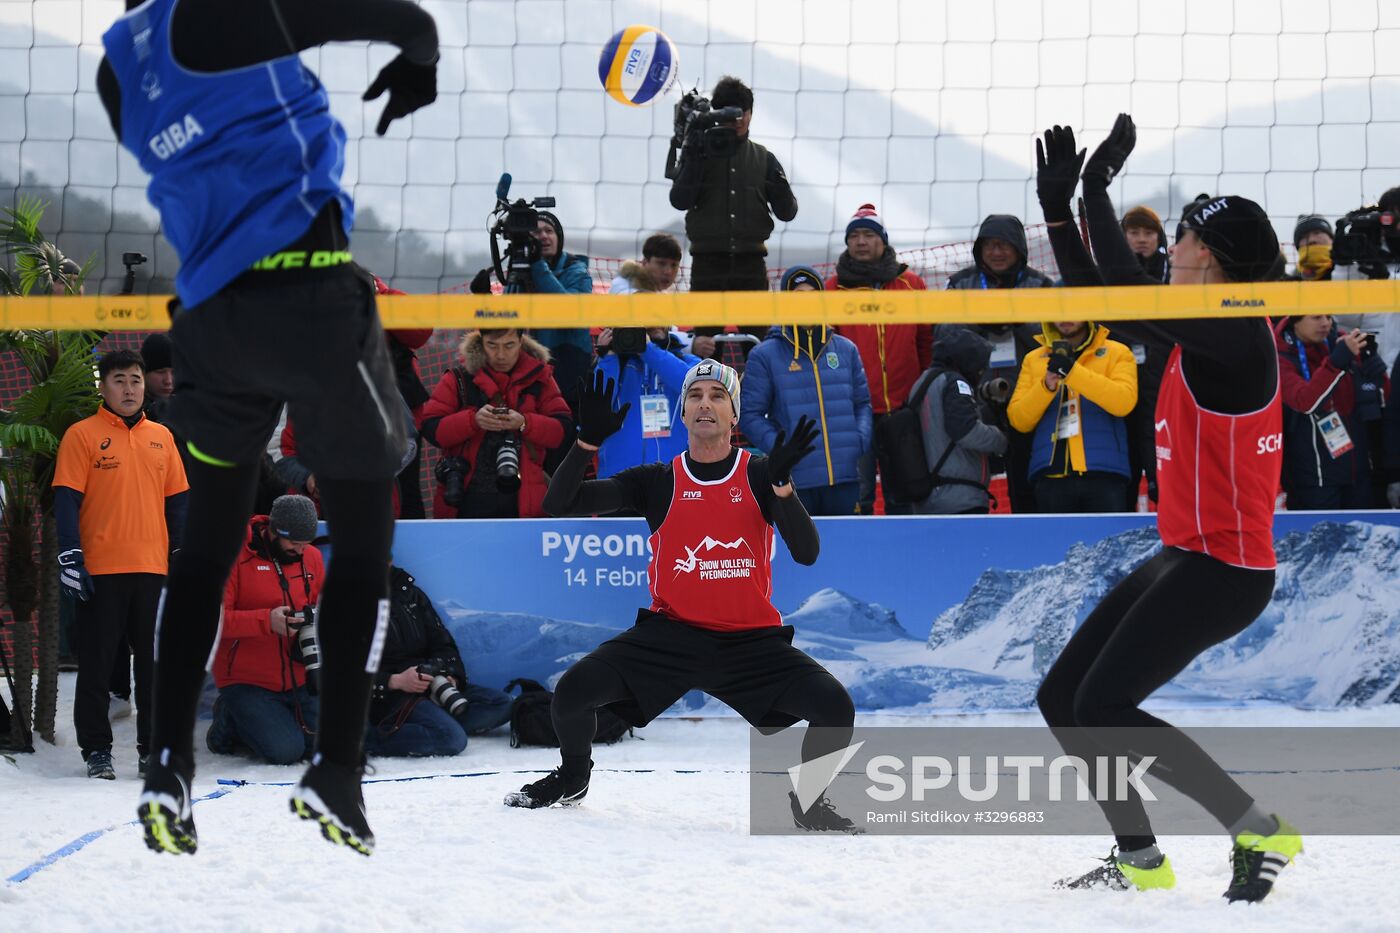 2018 Winter Olympics. Snow volleyball at Austria House